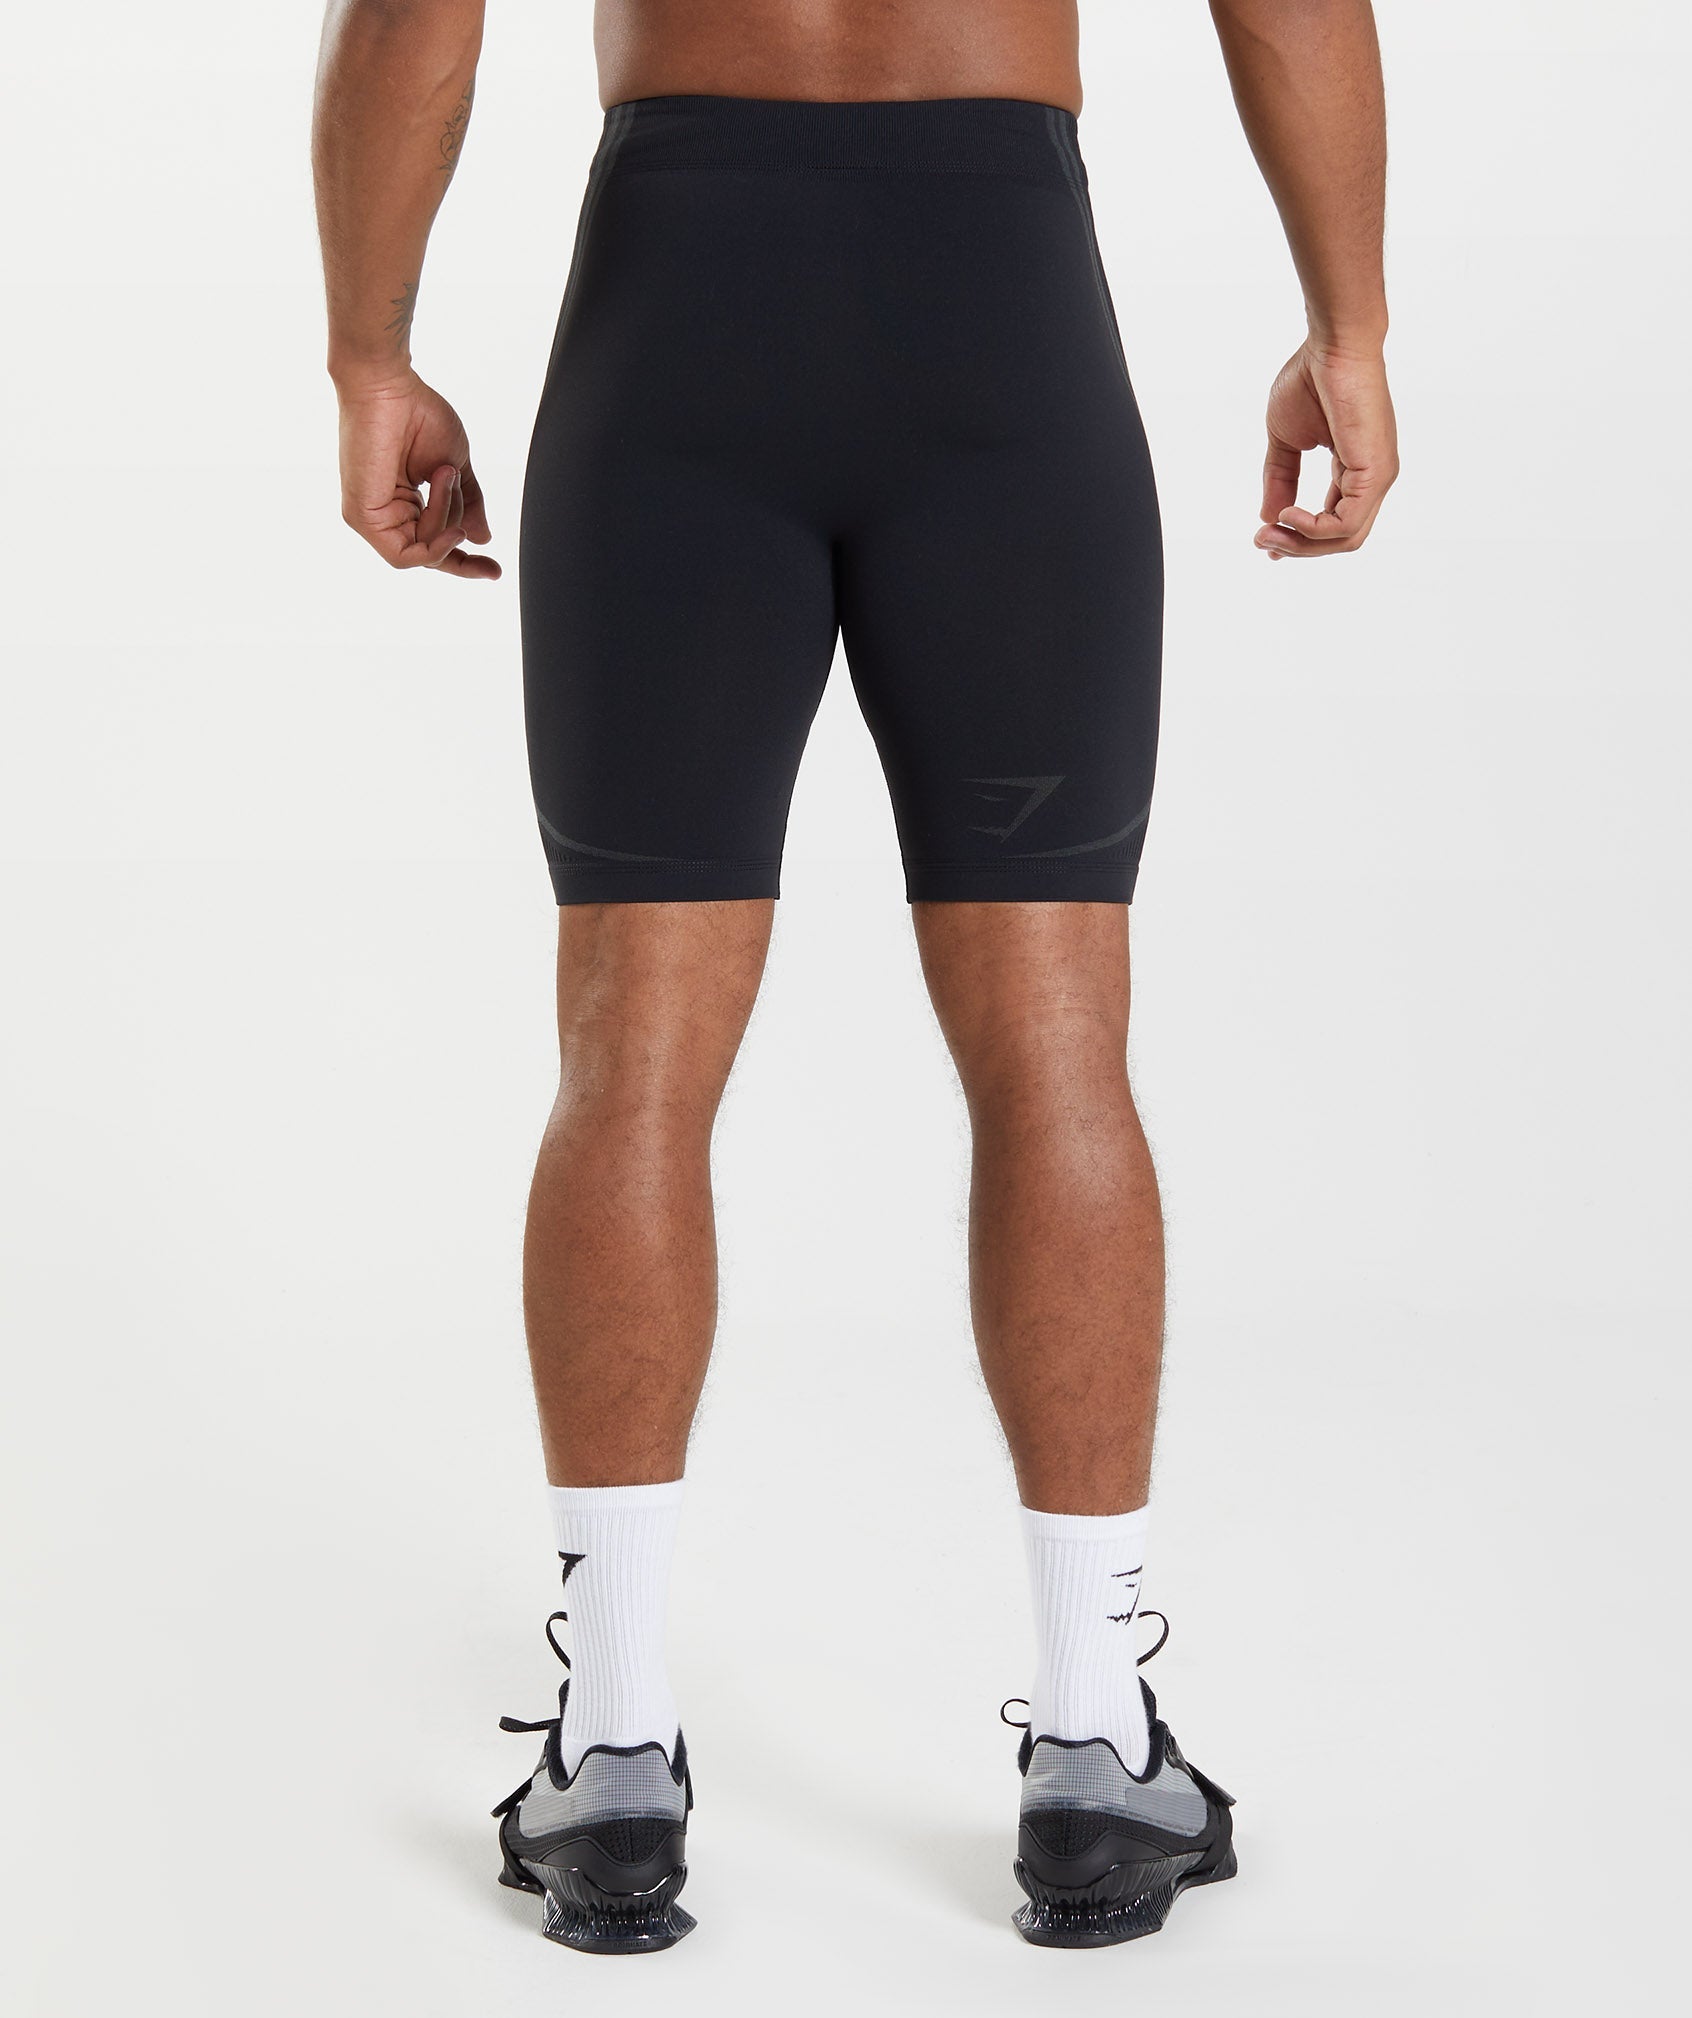 315 Seamless 1/2 Shorts in Black/Charcoal Grey - view 3